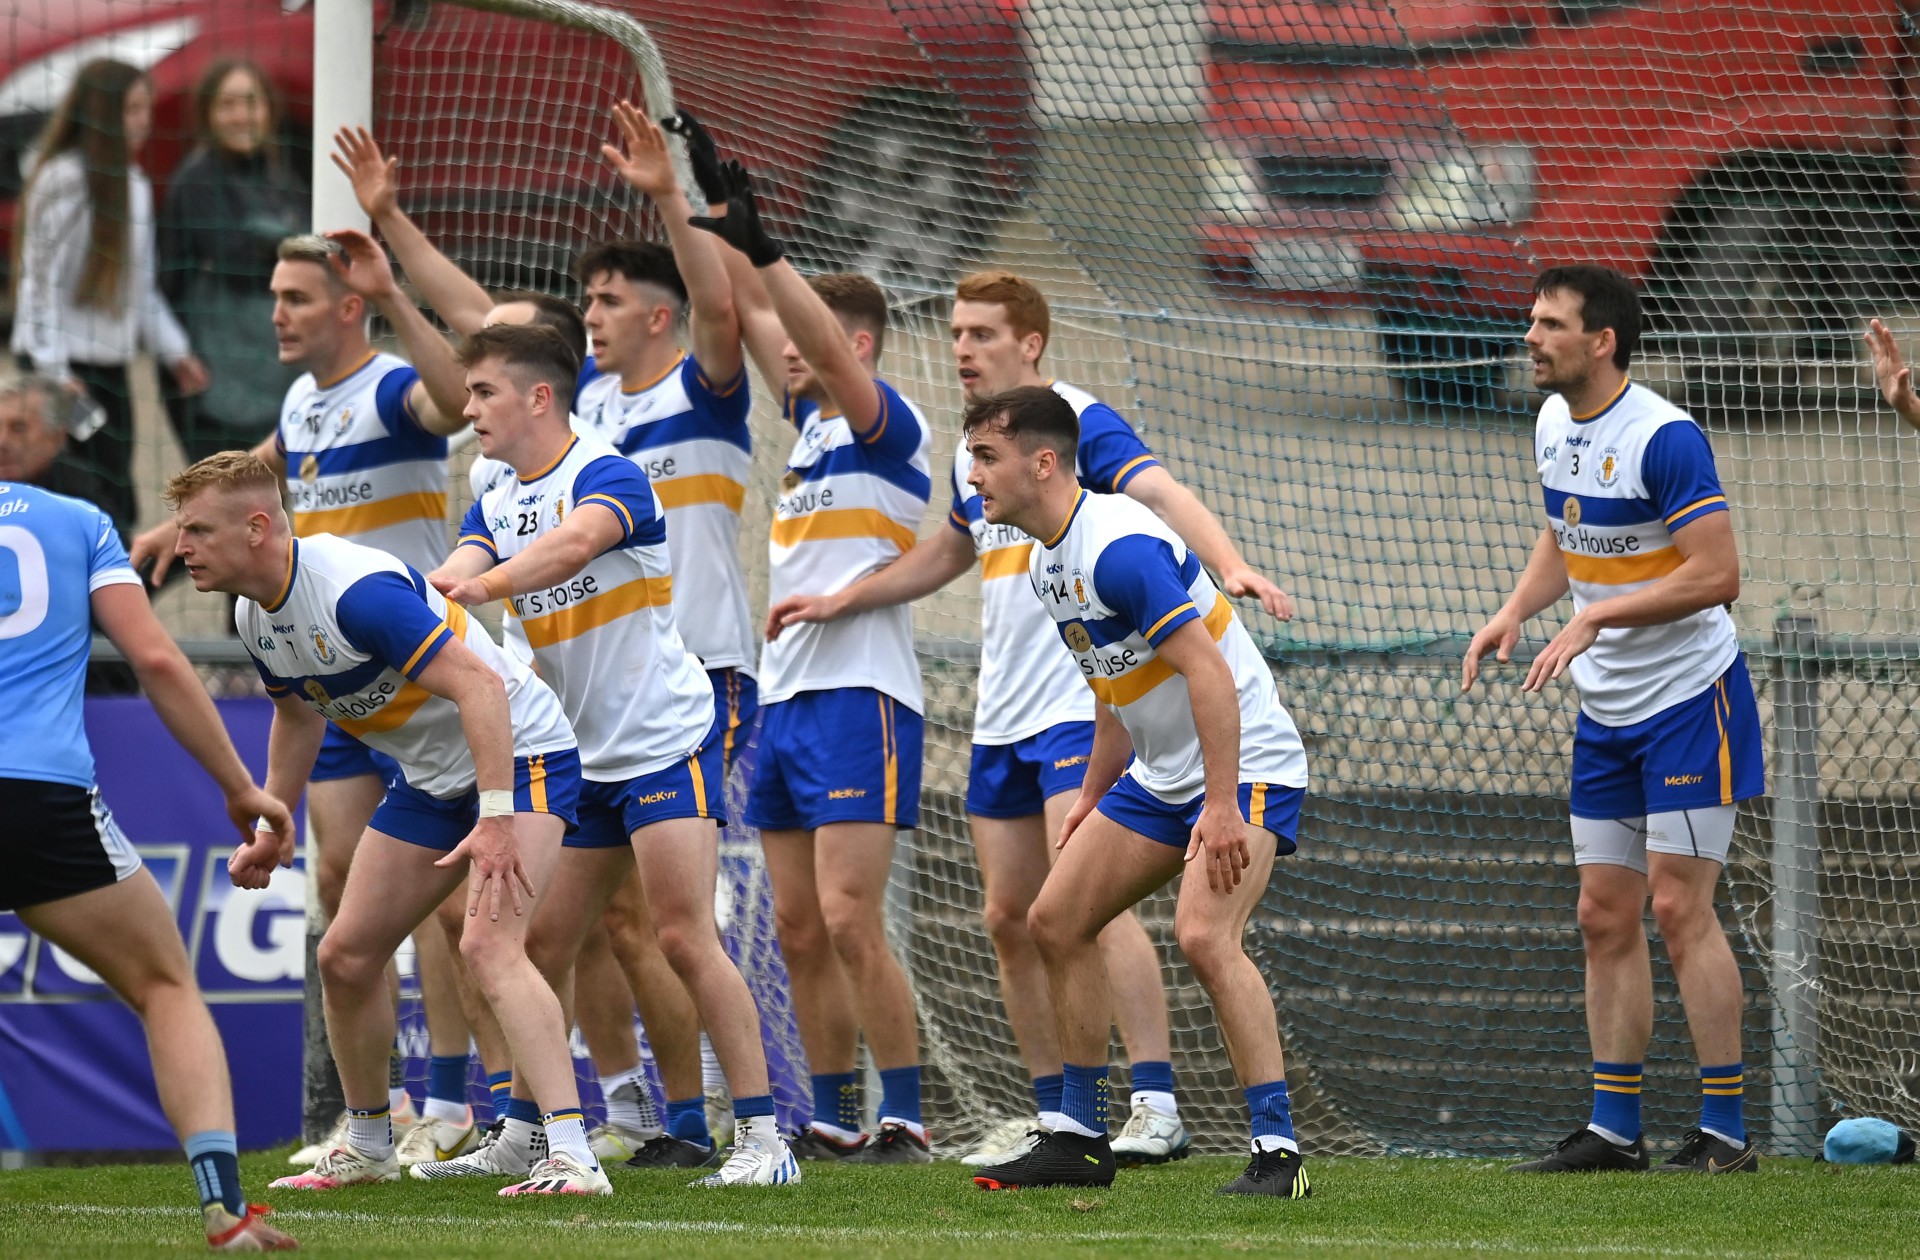 Errigal out to make their ‘Mark’ after near misses